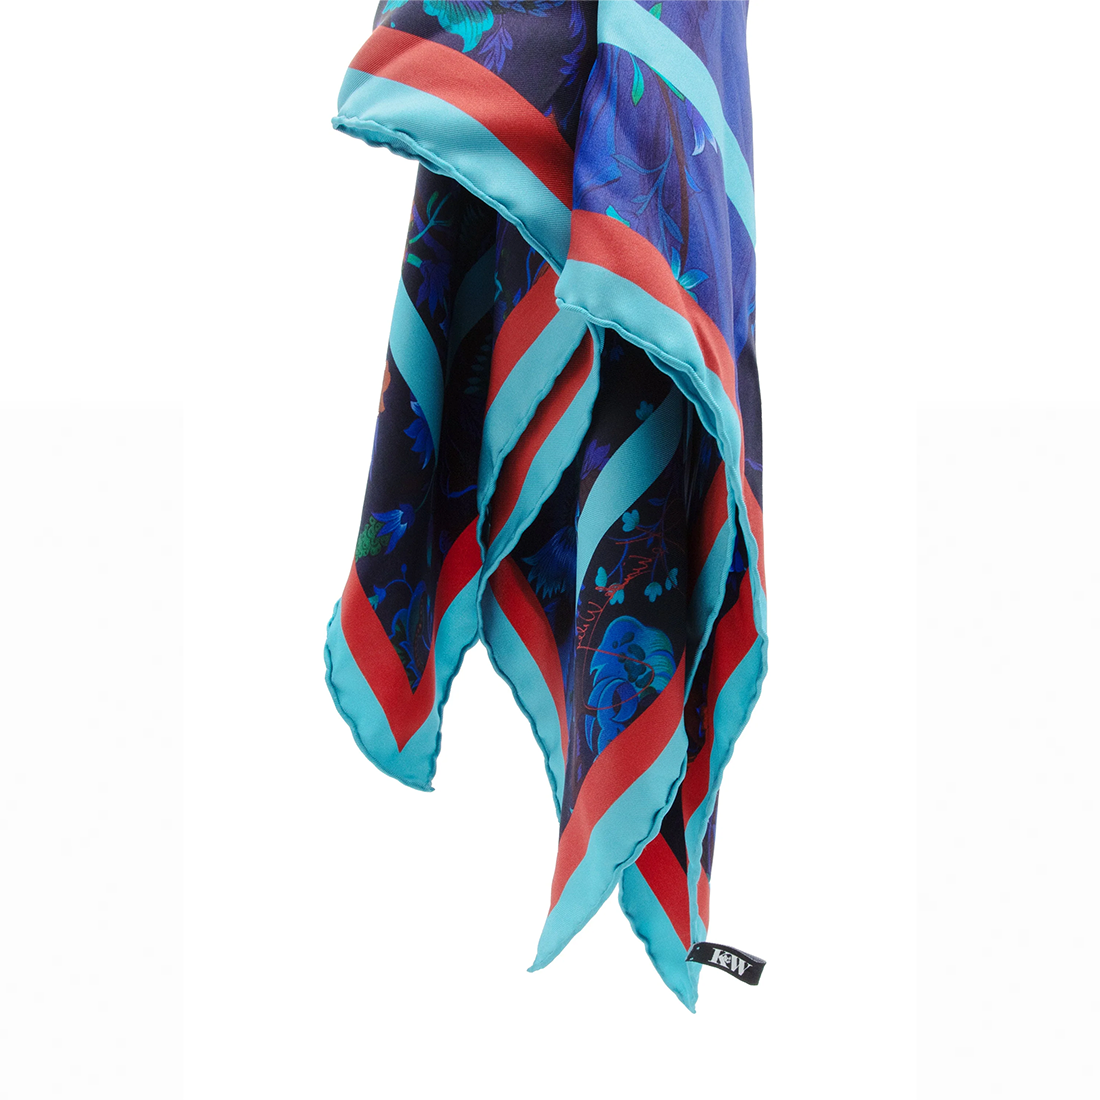 Kehinde Wiley Notes on Blue Silk Scarf